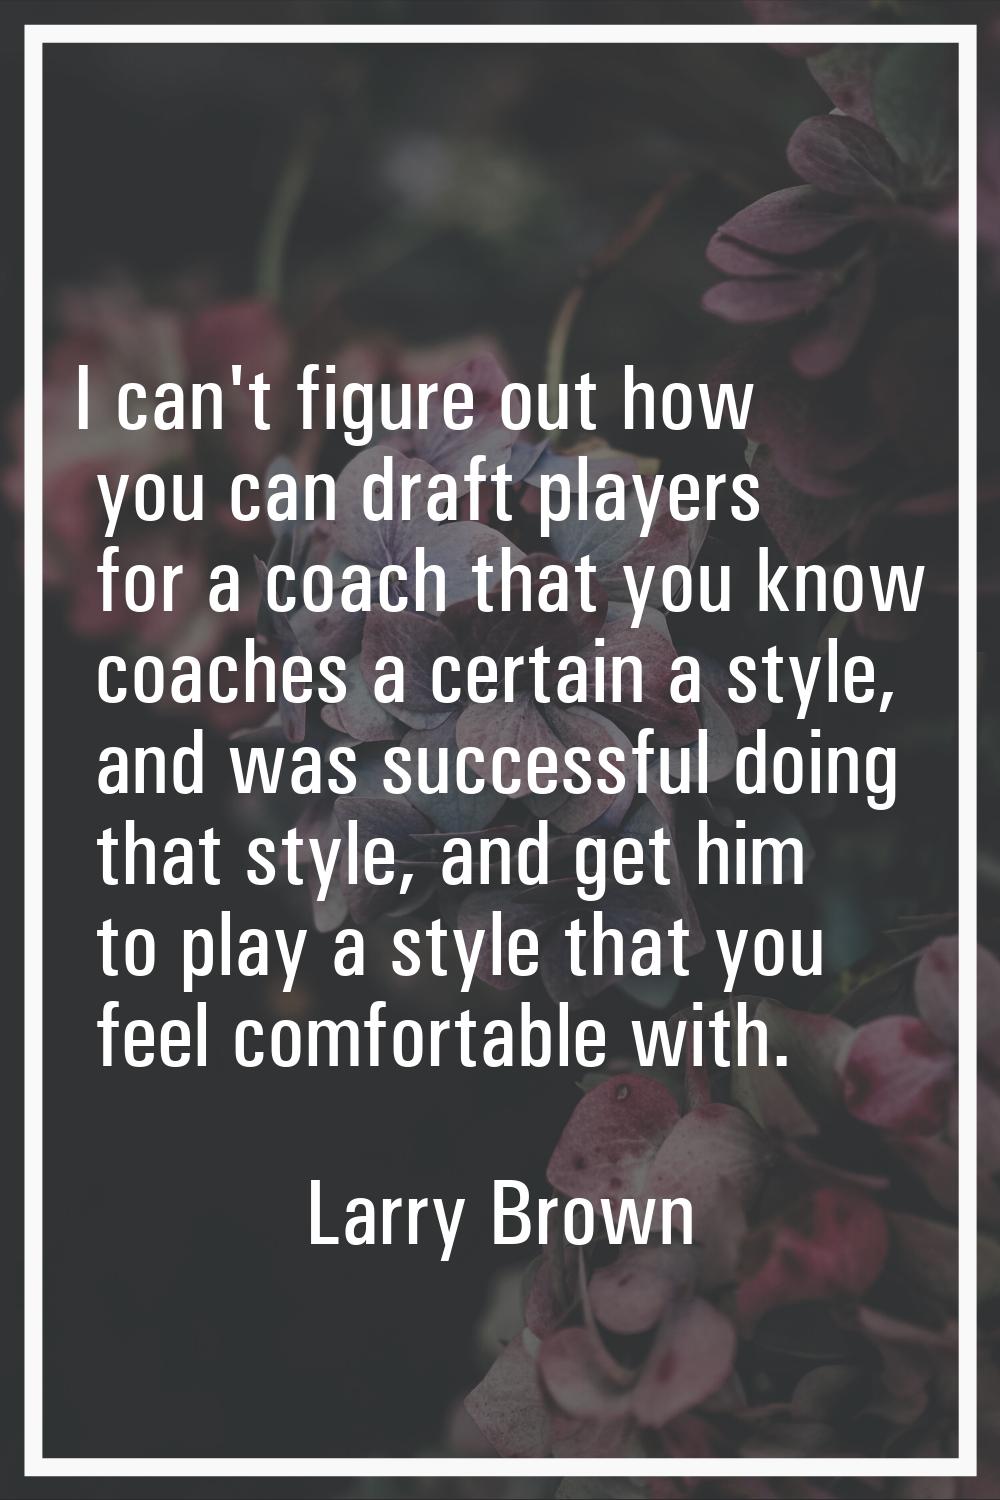 I can't figure out how you can draft players for a coach that you know coaches a certain a style, a